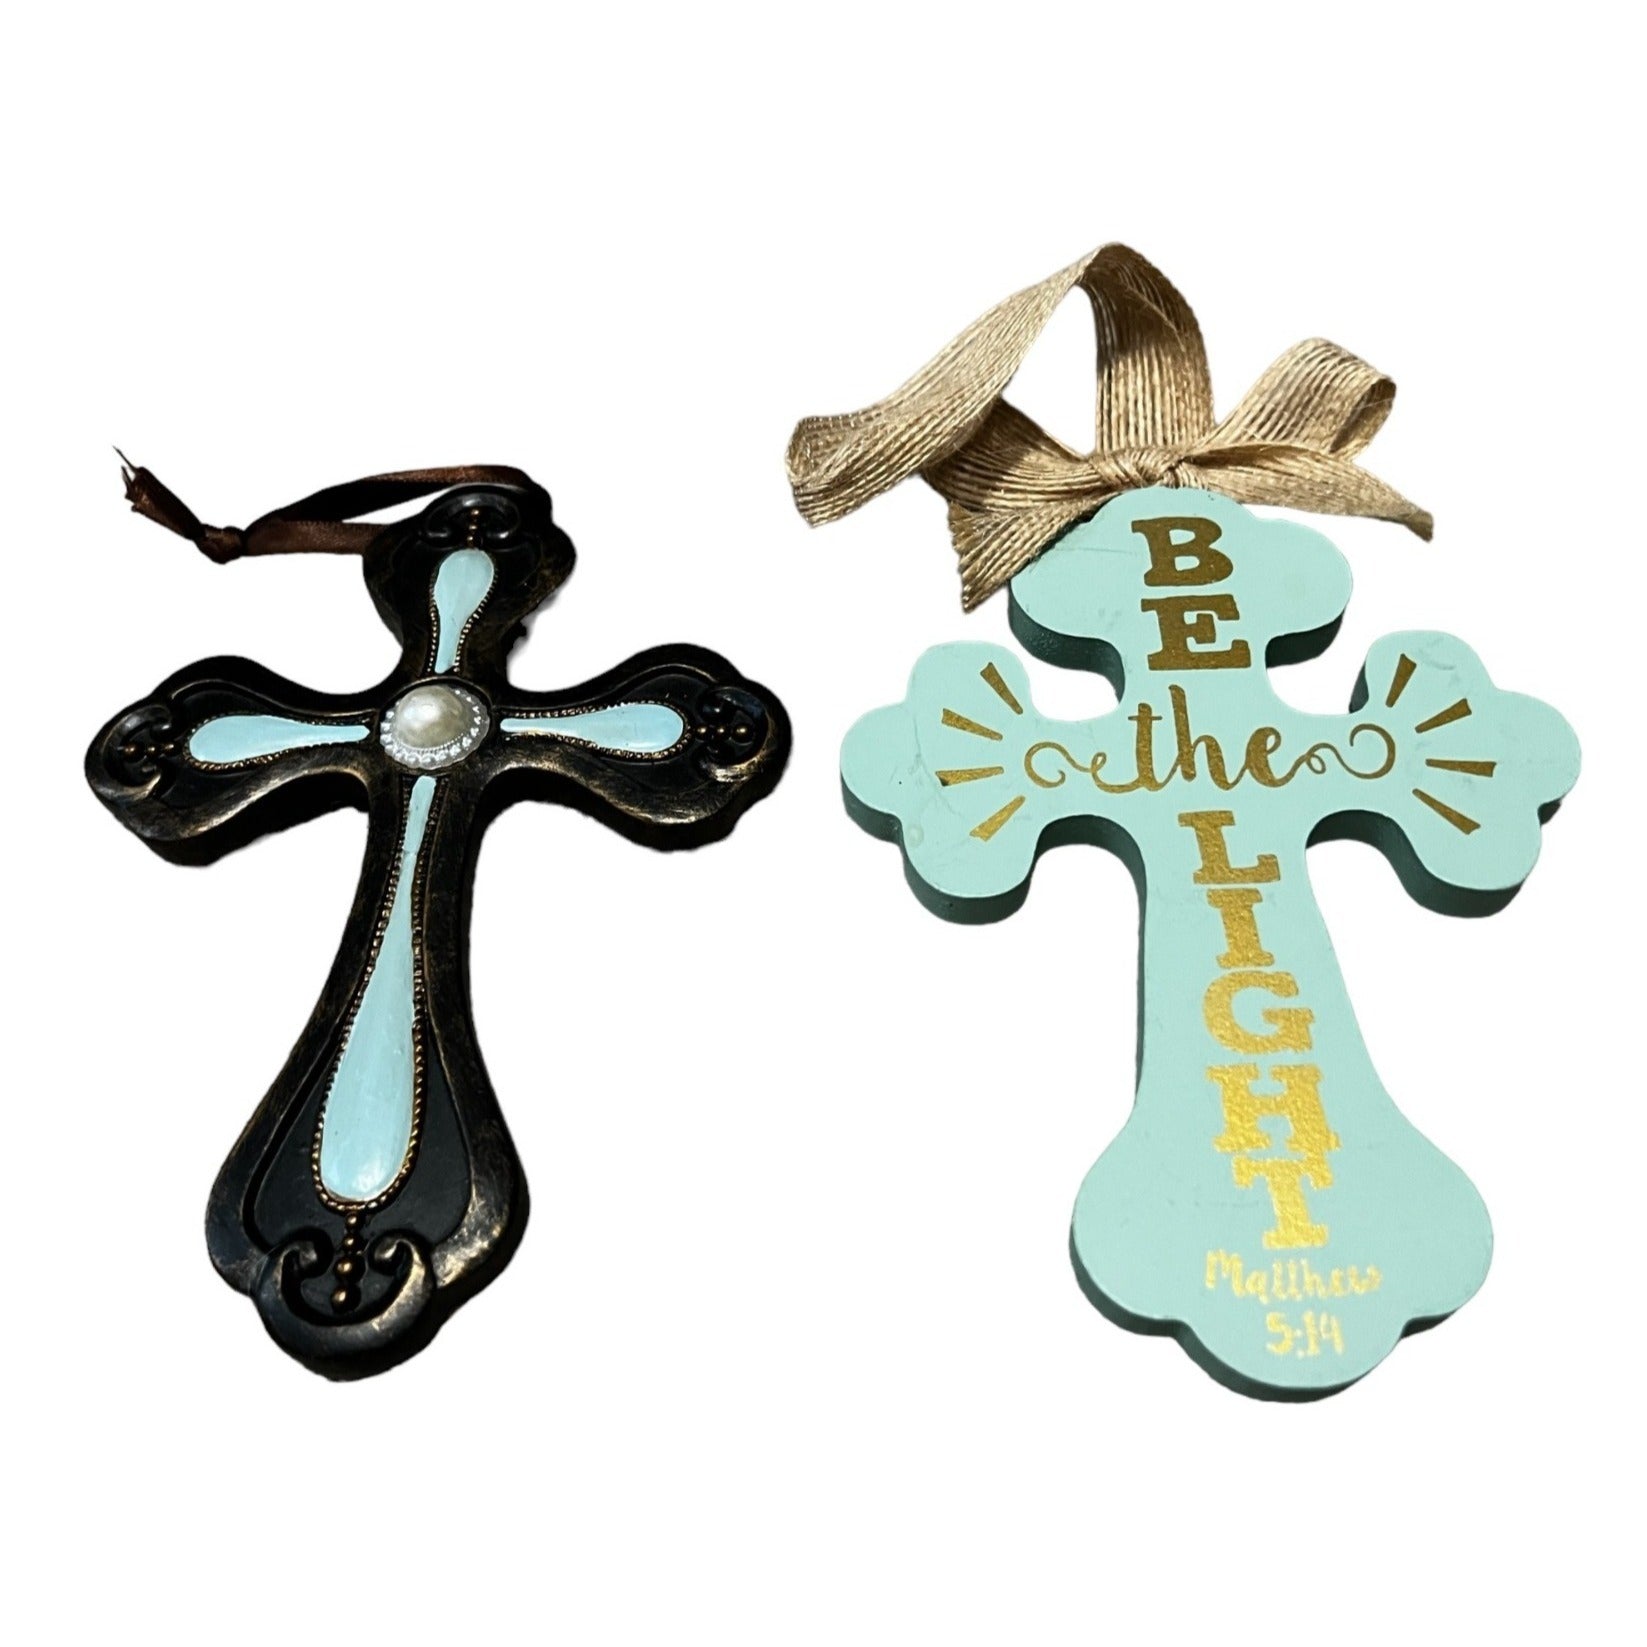 Bundle of 2 Wooden Cross Decor Jeweled Cross with "Be the Light" Cross